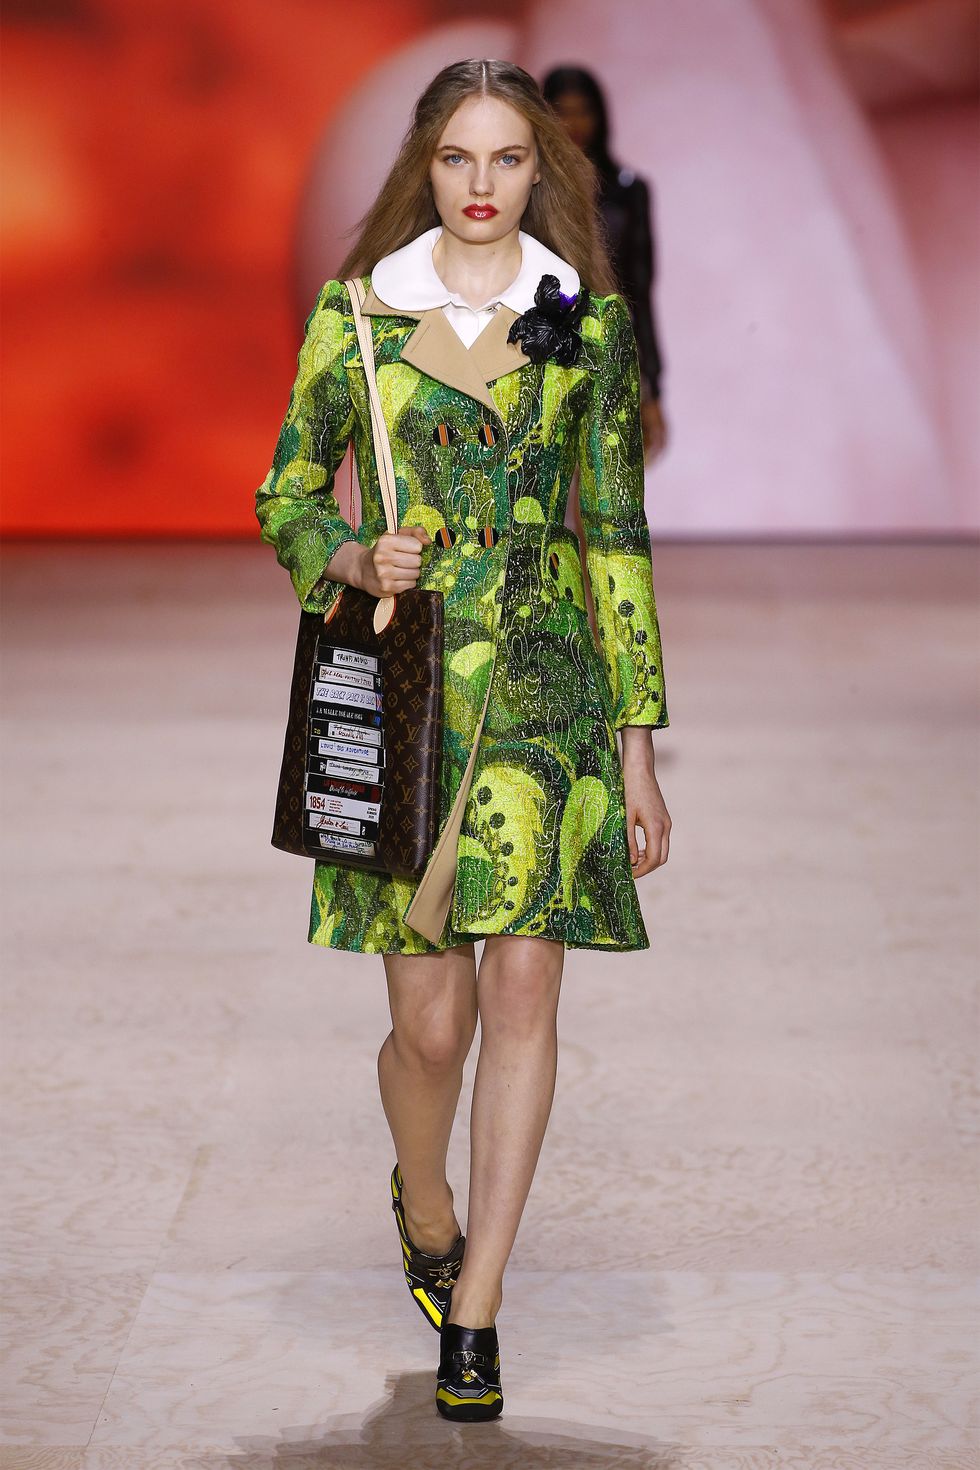 Best 3 Looks from Louis Vuitton SS 2020 & How to Wear Them